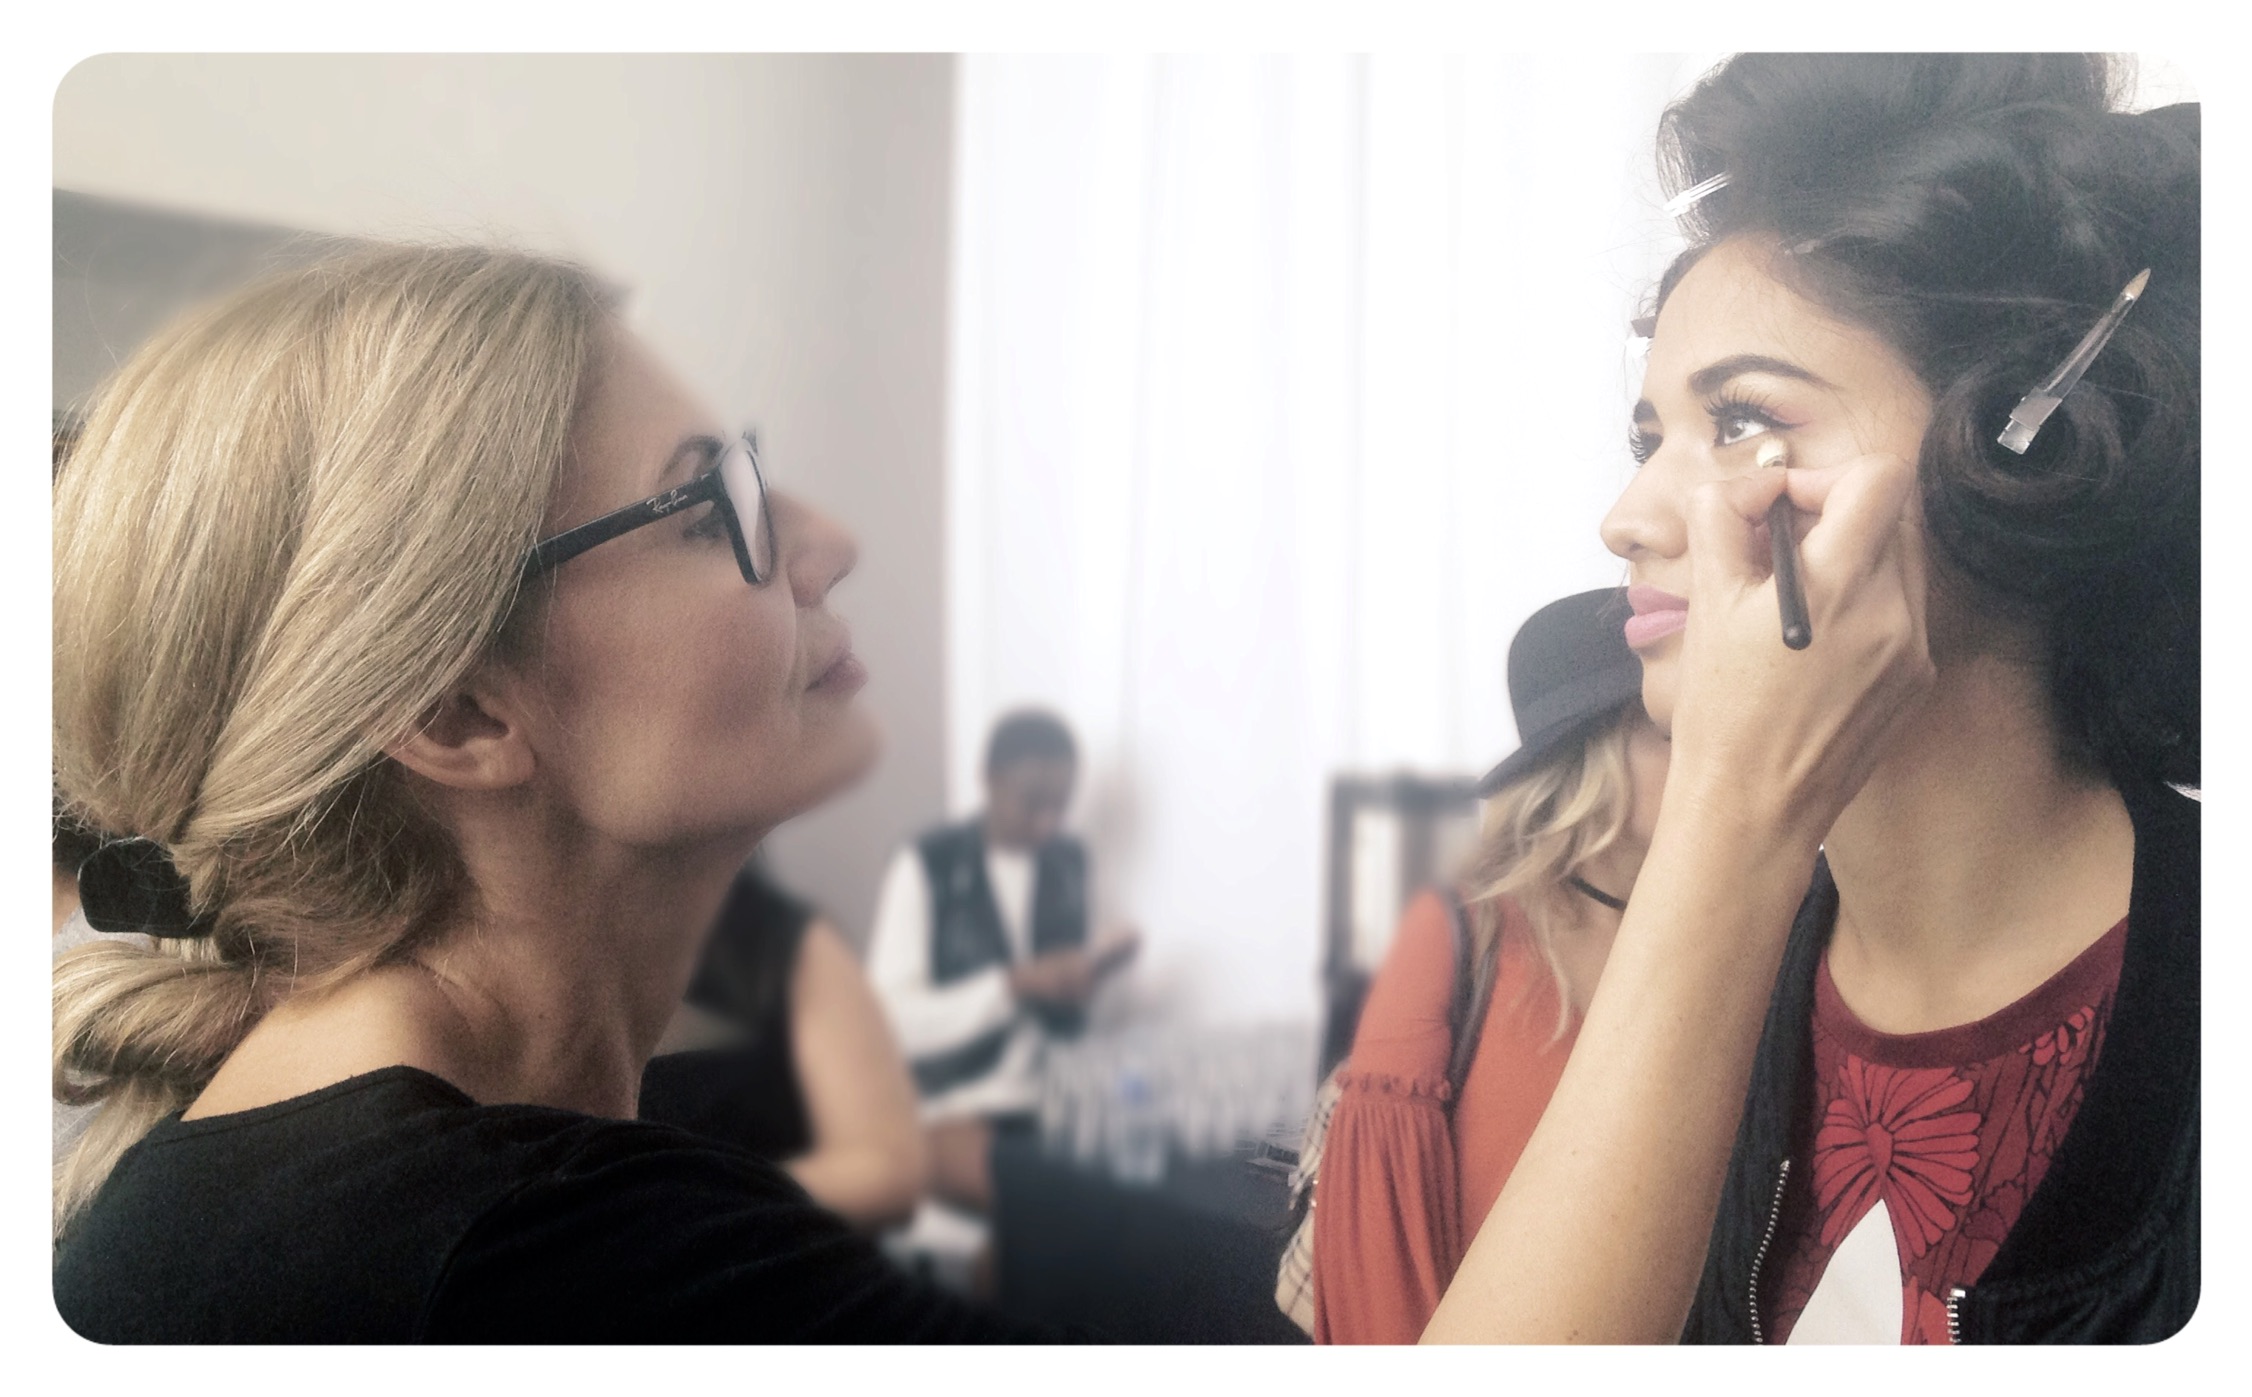 Irene Kyranis, a Bridal make up artist in Greece is applying make up to a beautiful bride